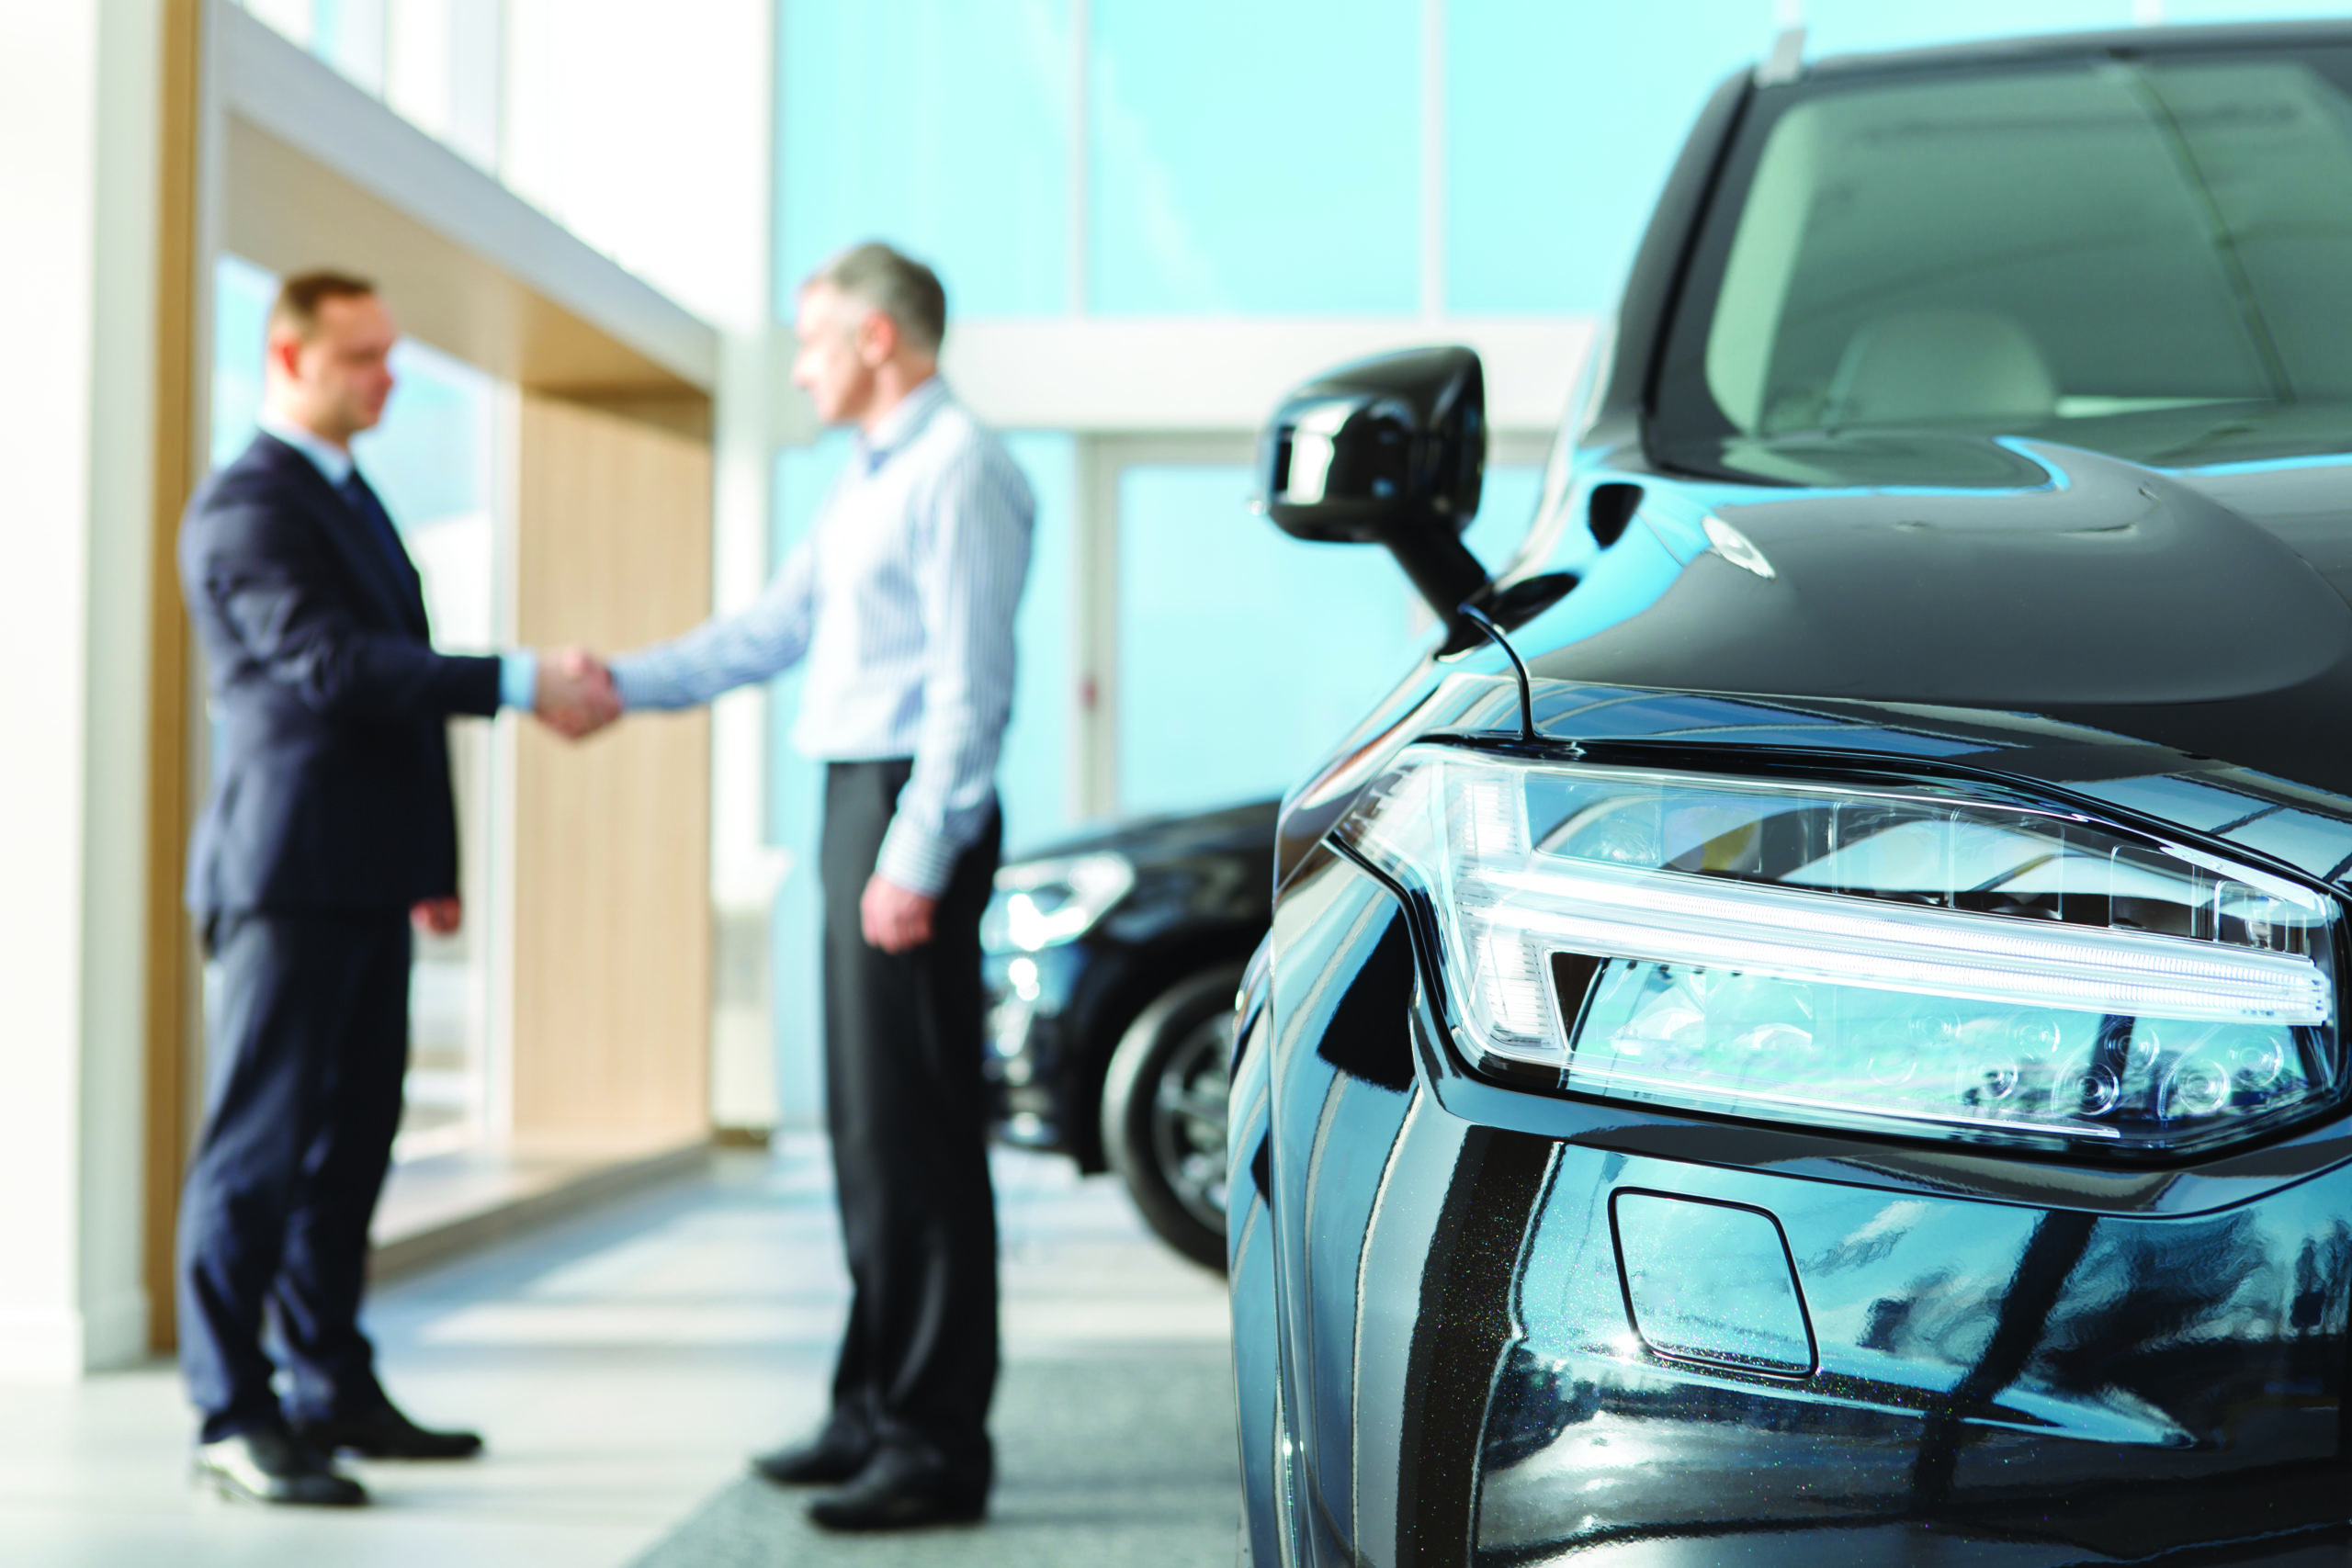 Deal closed. Selective focus on a car businessman shaking hands with car dealer after buying a new car copyspace deal contract agreement car dealership customer client service sales vehicle insurance